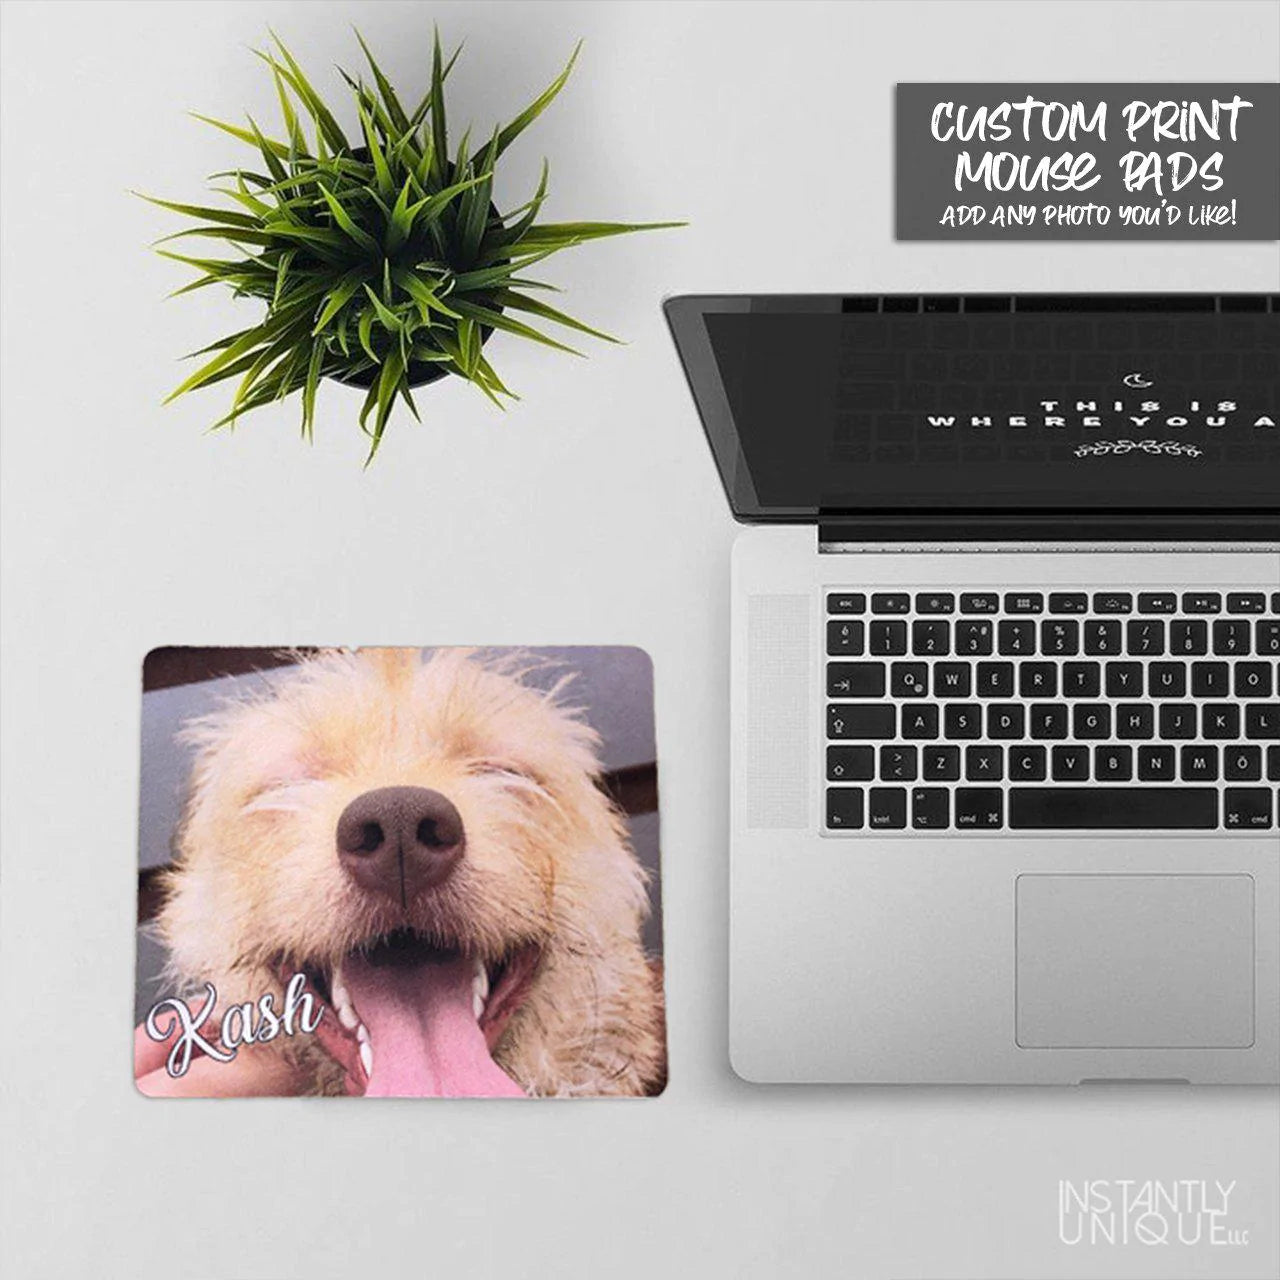 Custom Mouse Pad with Pictures - Add your photos